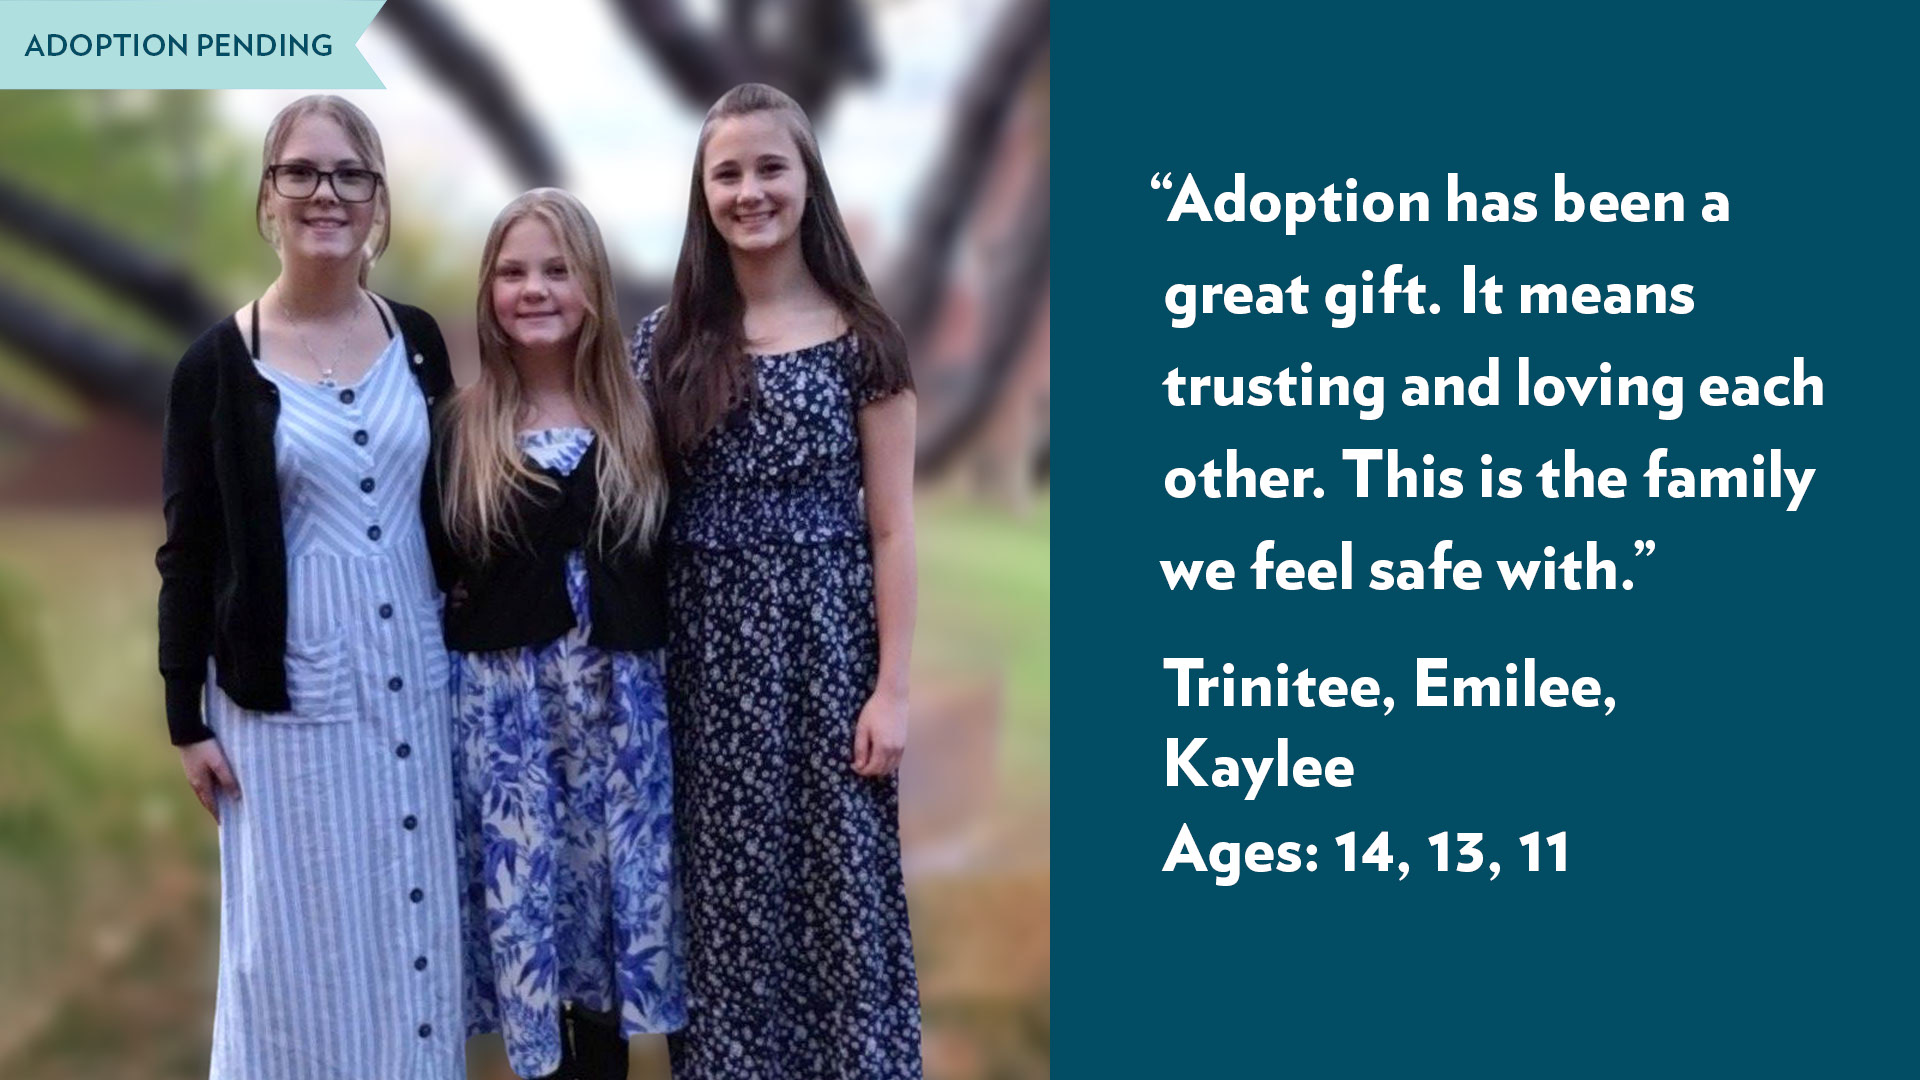 Adoption has been a great gift. It means trusting and loving each other. This is the family we feel safe with. Trinitee, Emilee, Kaylee, ages 14, 13, 11. Adoption pending.